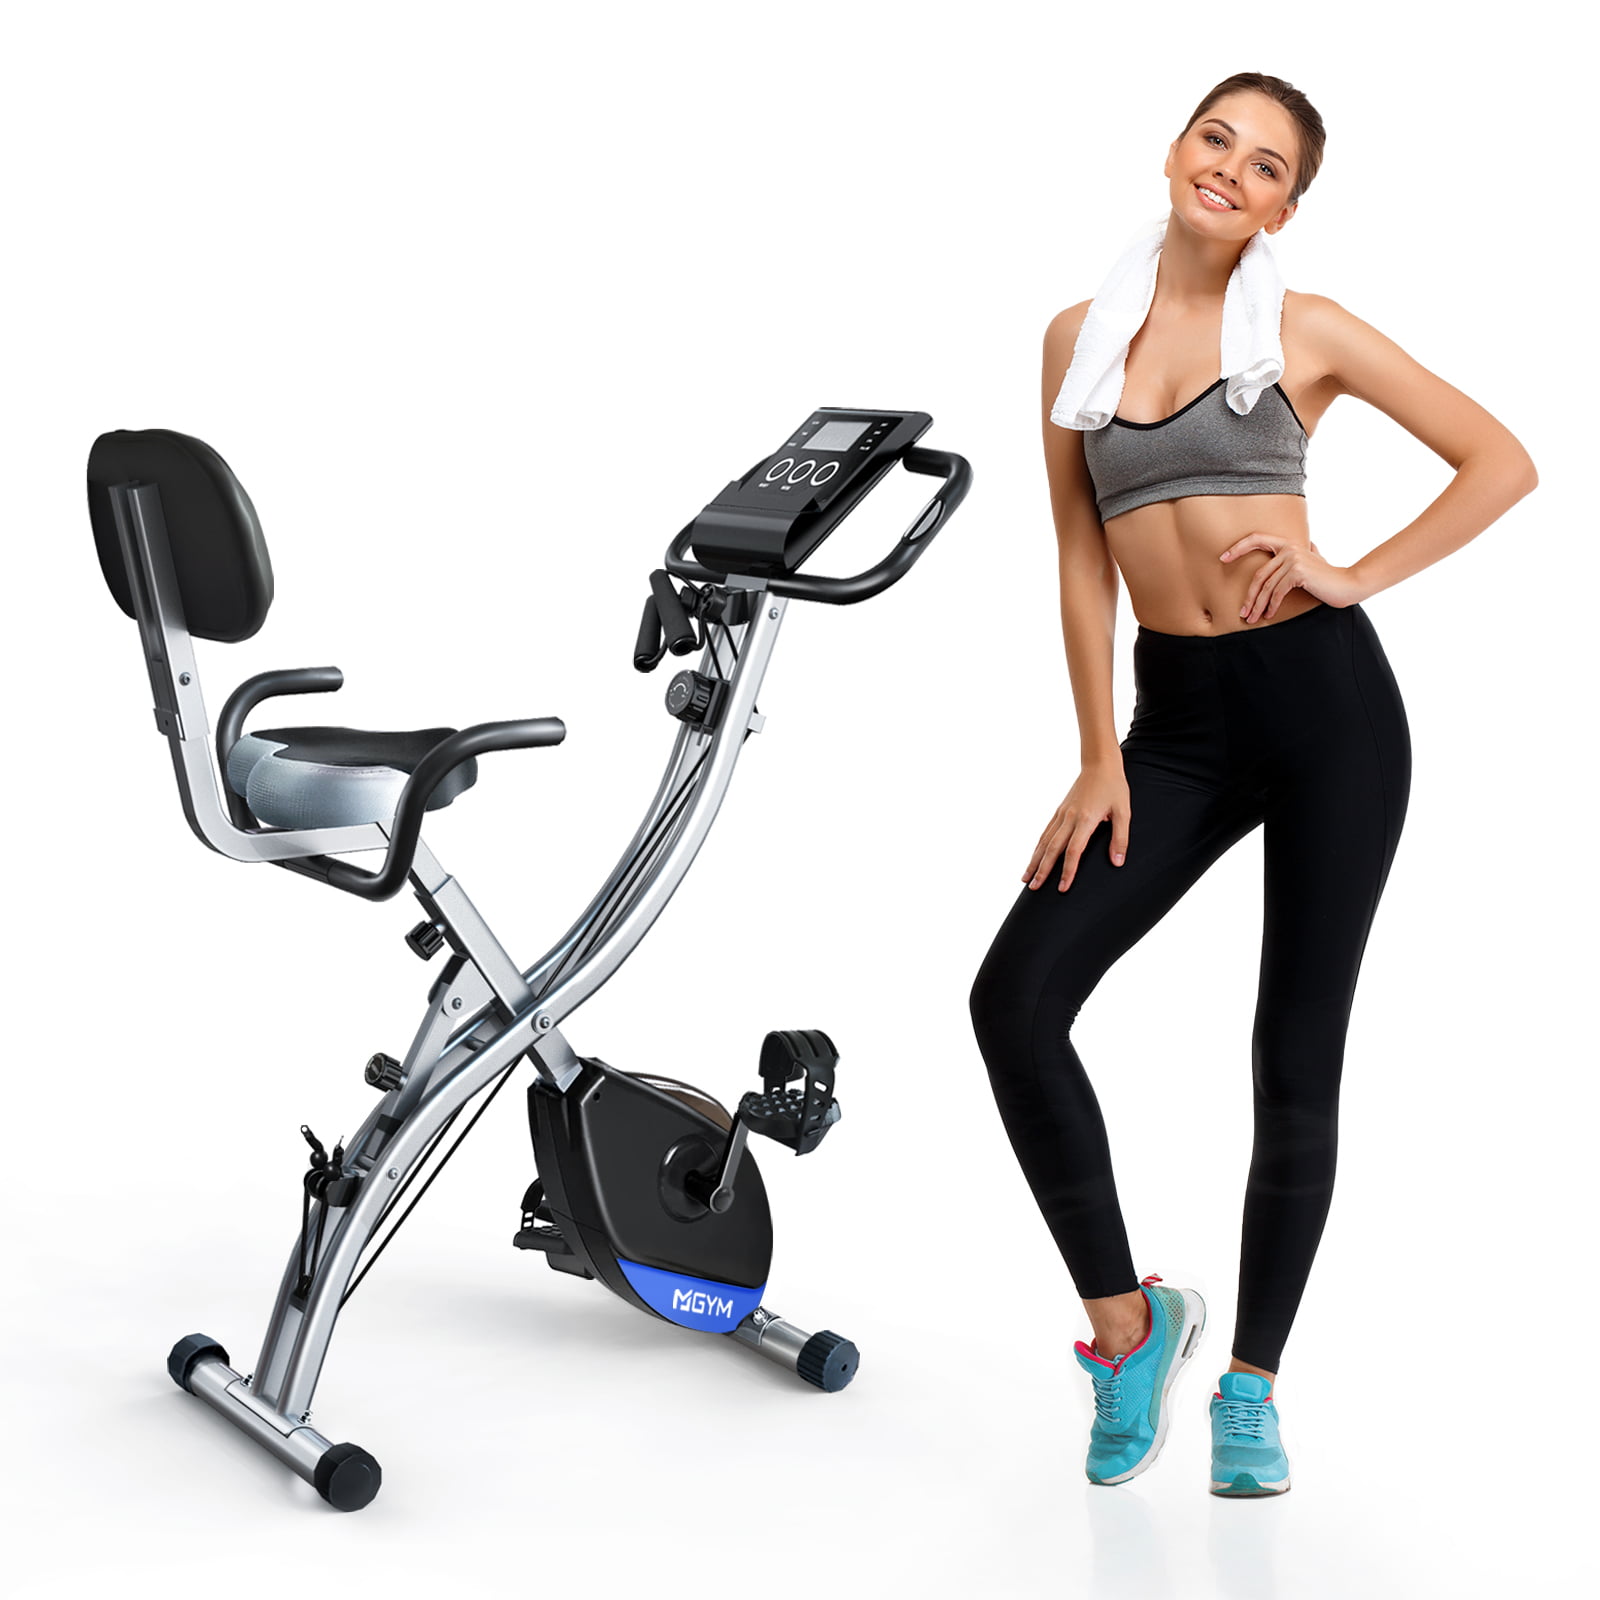 Folding Cycling Exercise Bike Stationary Fitness Cardio Indoor Home Workout Gym 